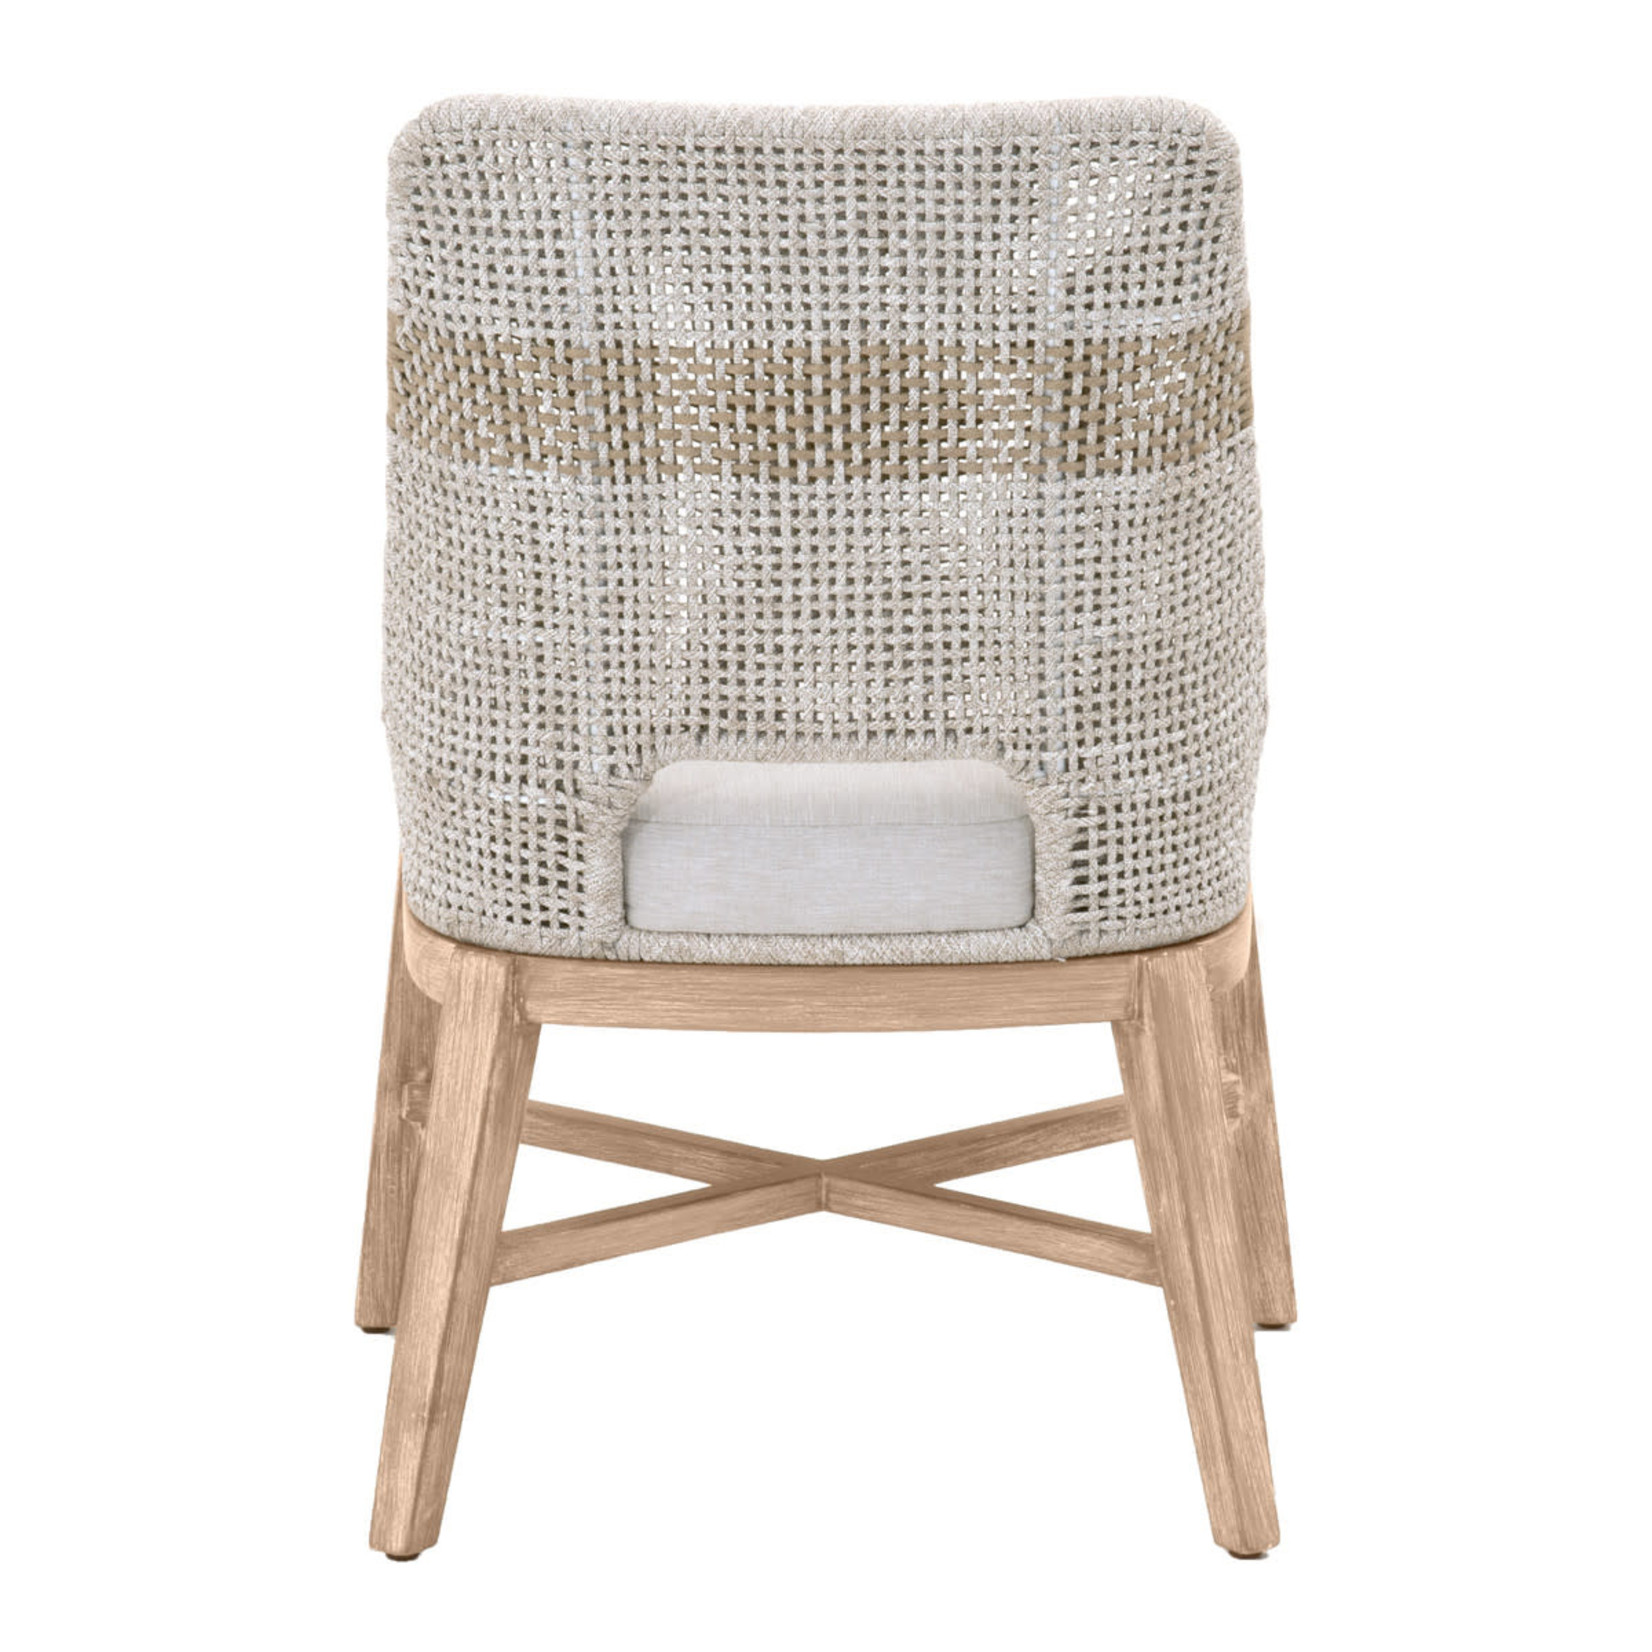 Tapestry Dining Chair - Taupe & White Flat Rope